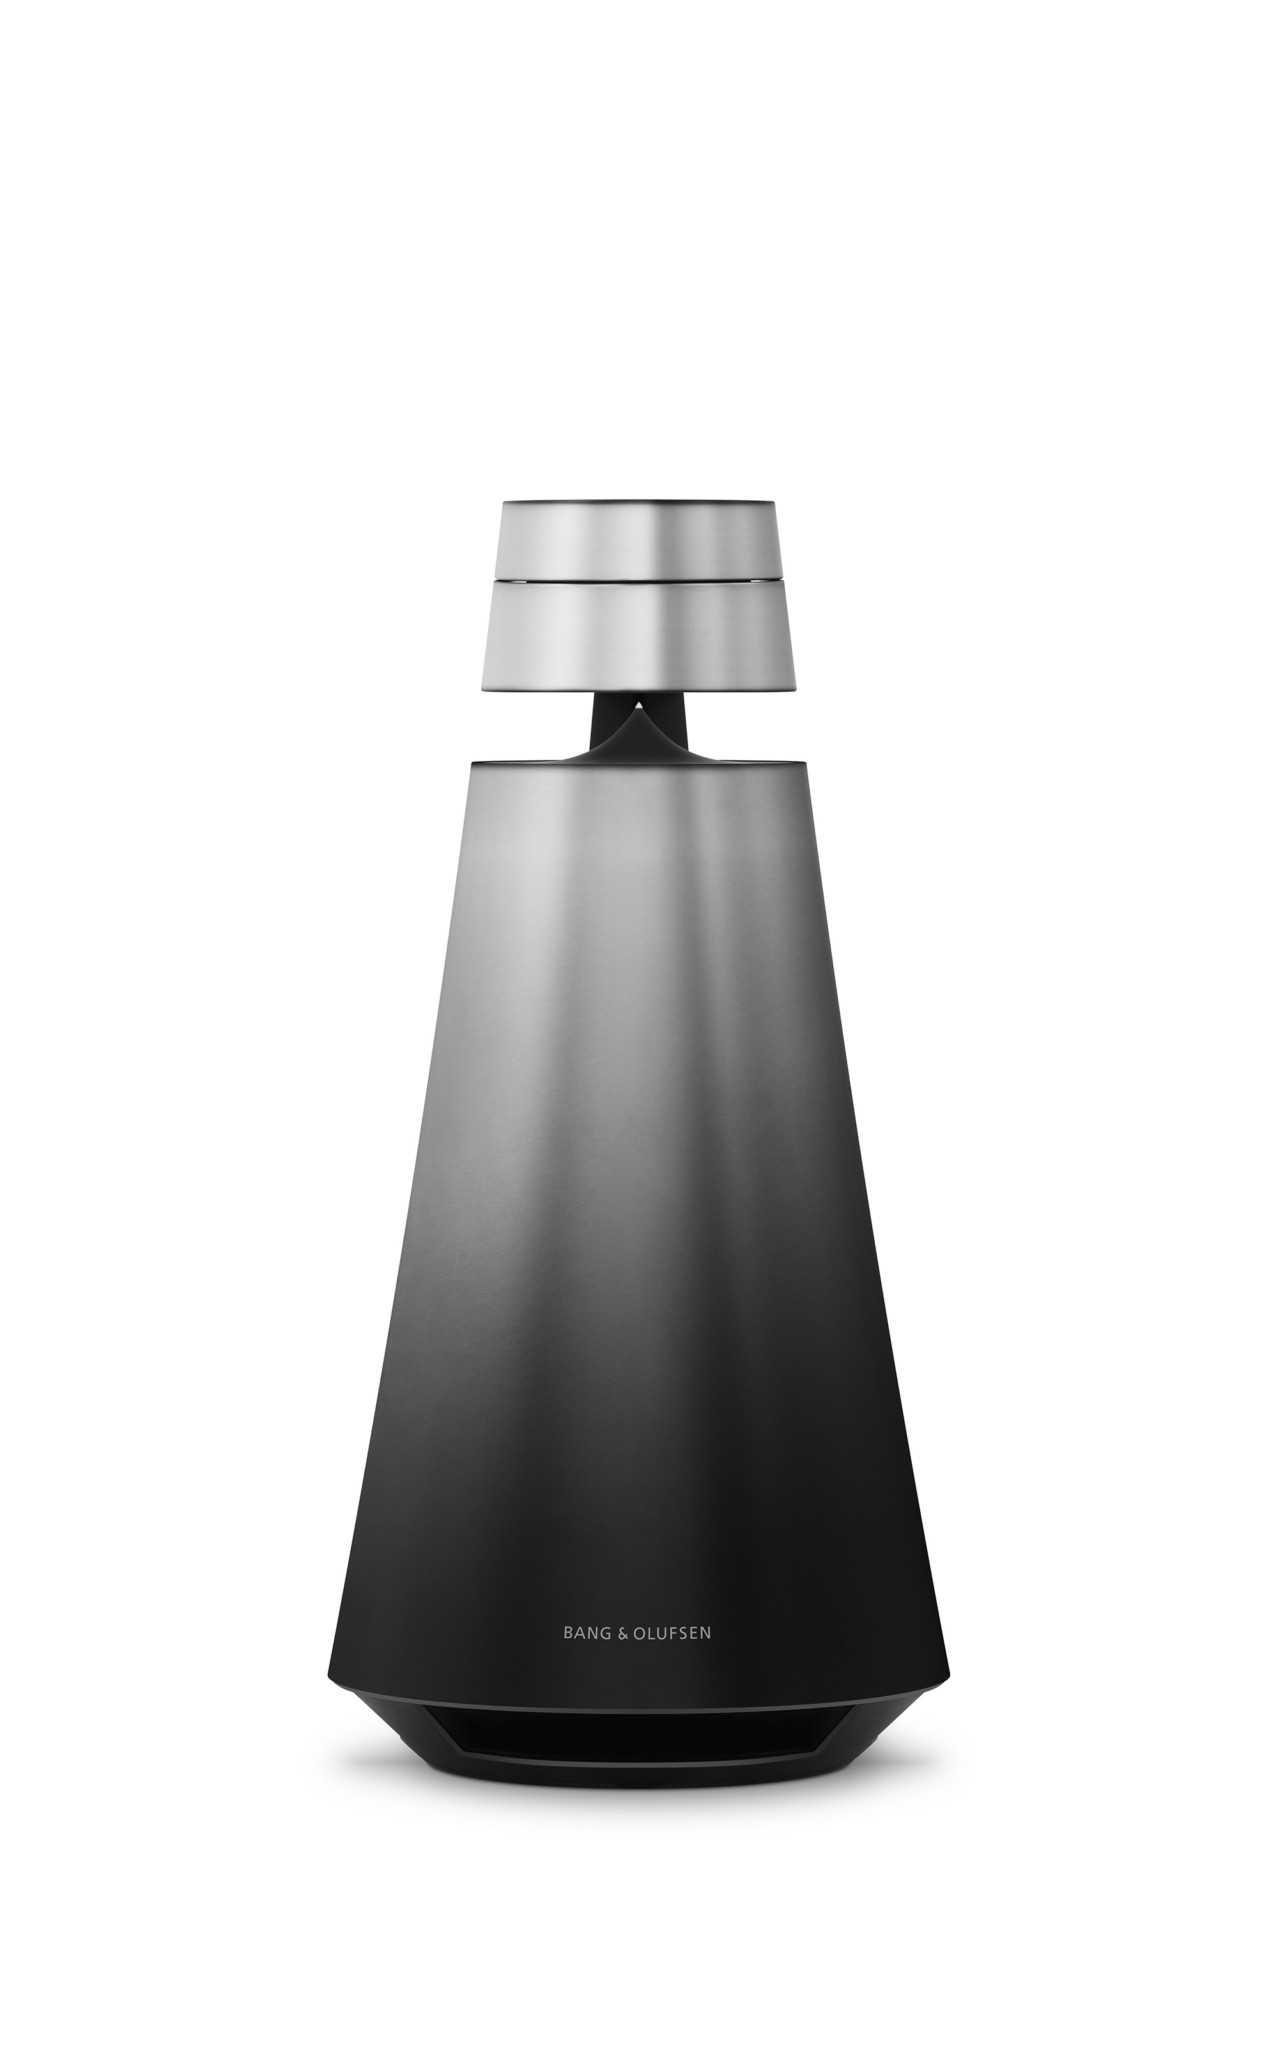 This Limited Edition Beosound 1 Is Designed to Evoke the New York